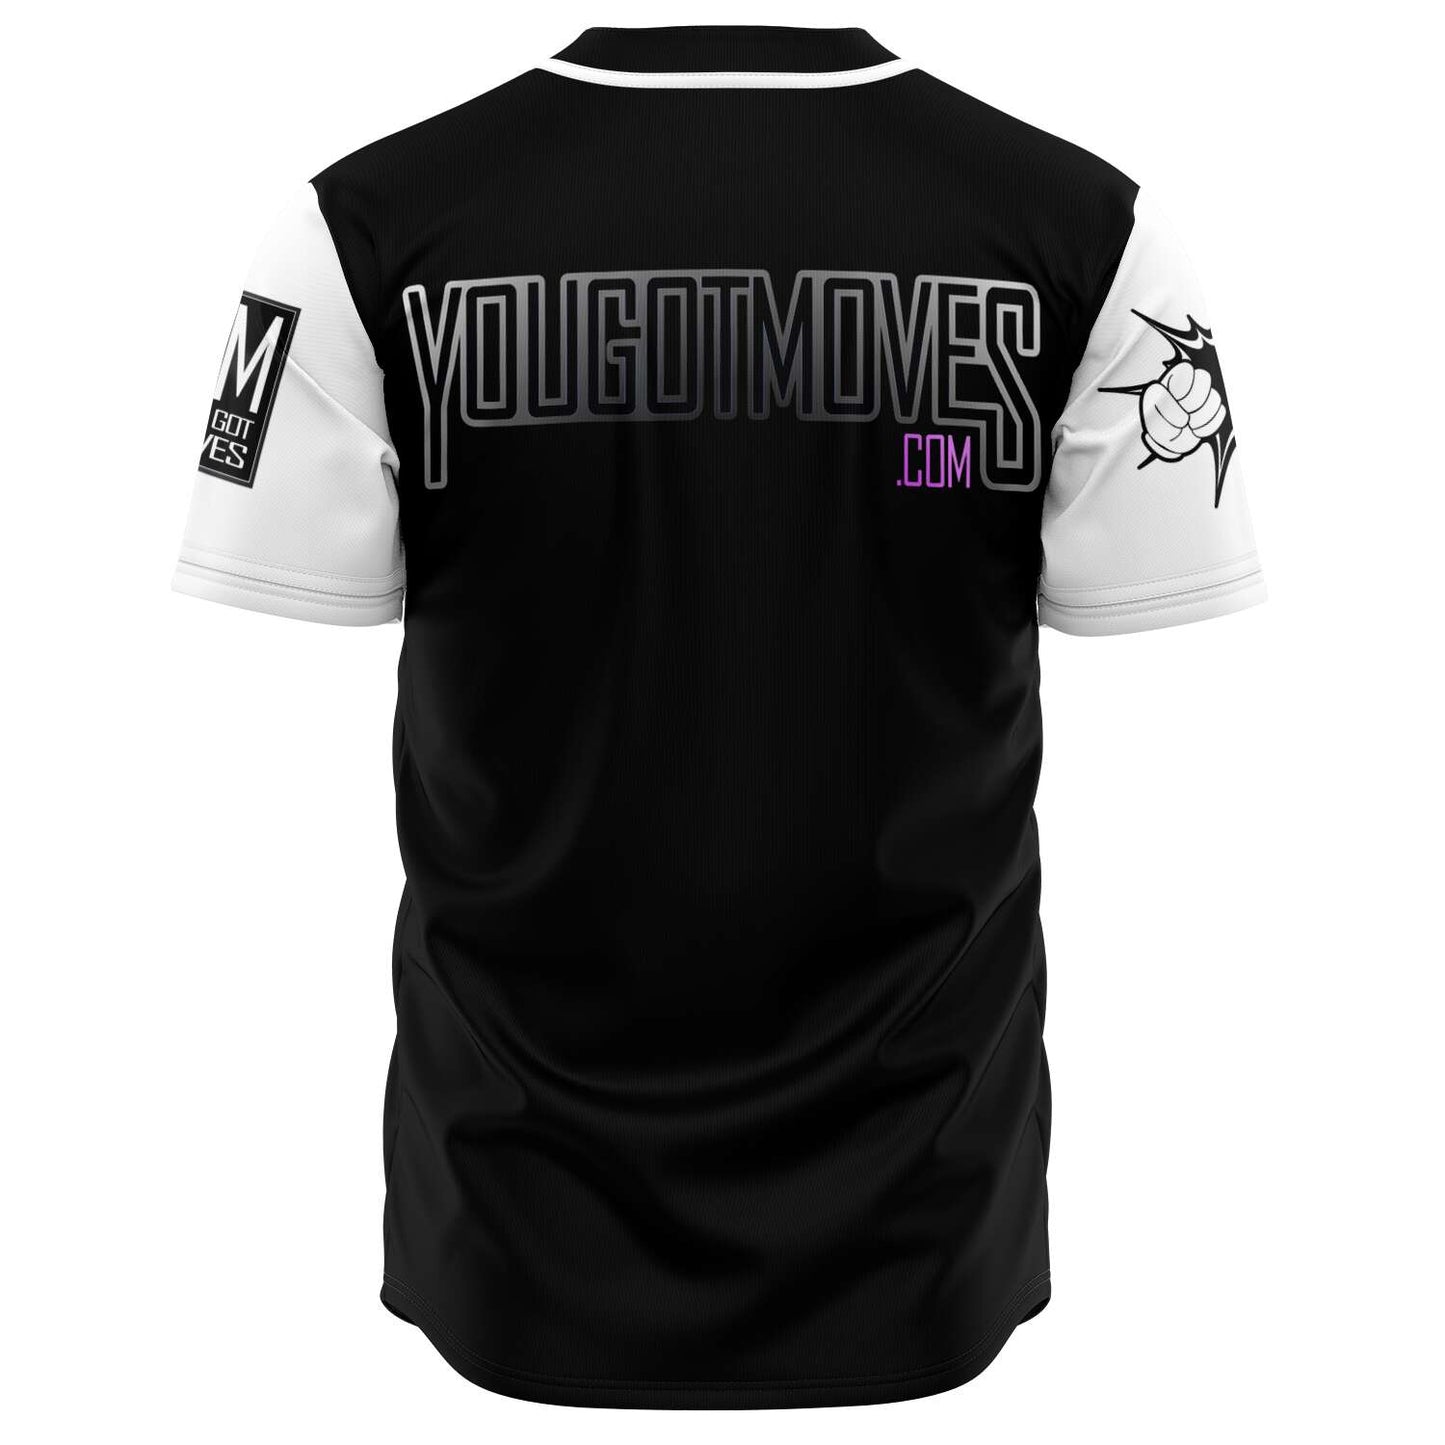 YGM Official Festival Jersey